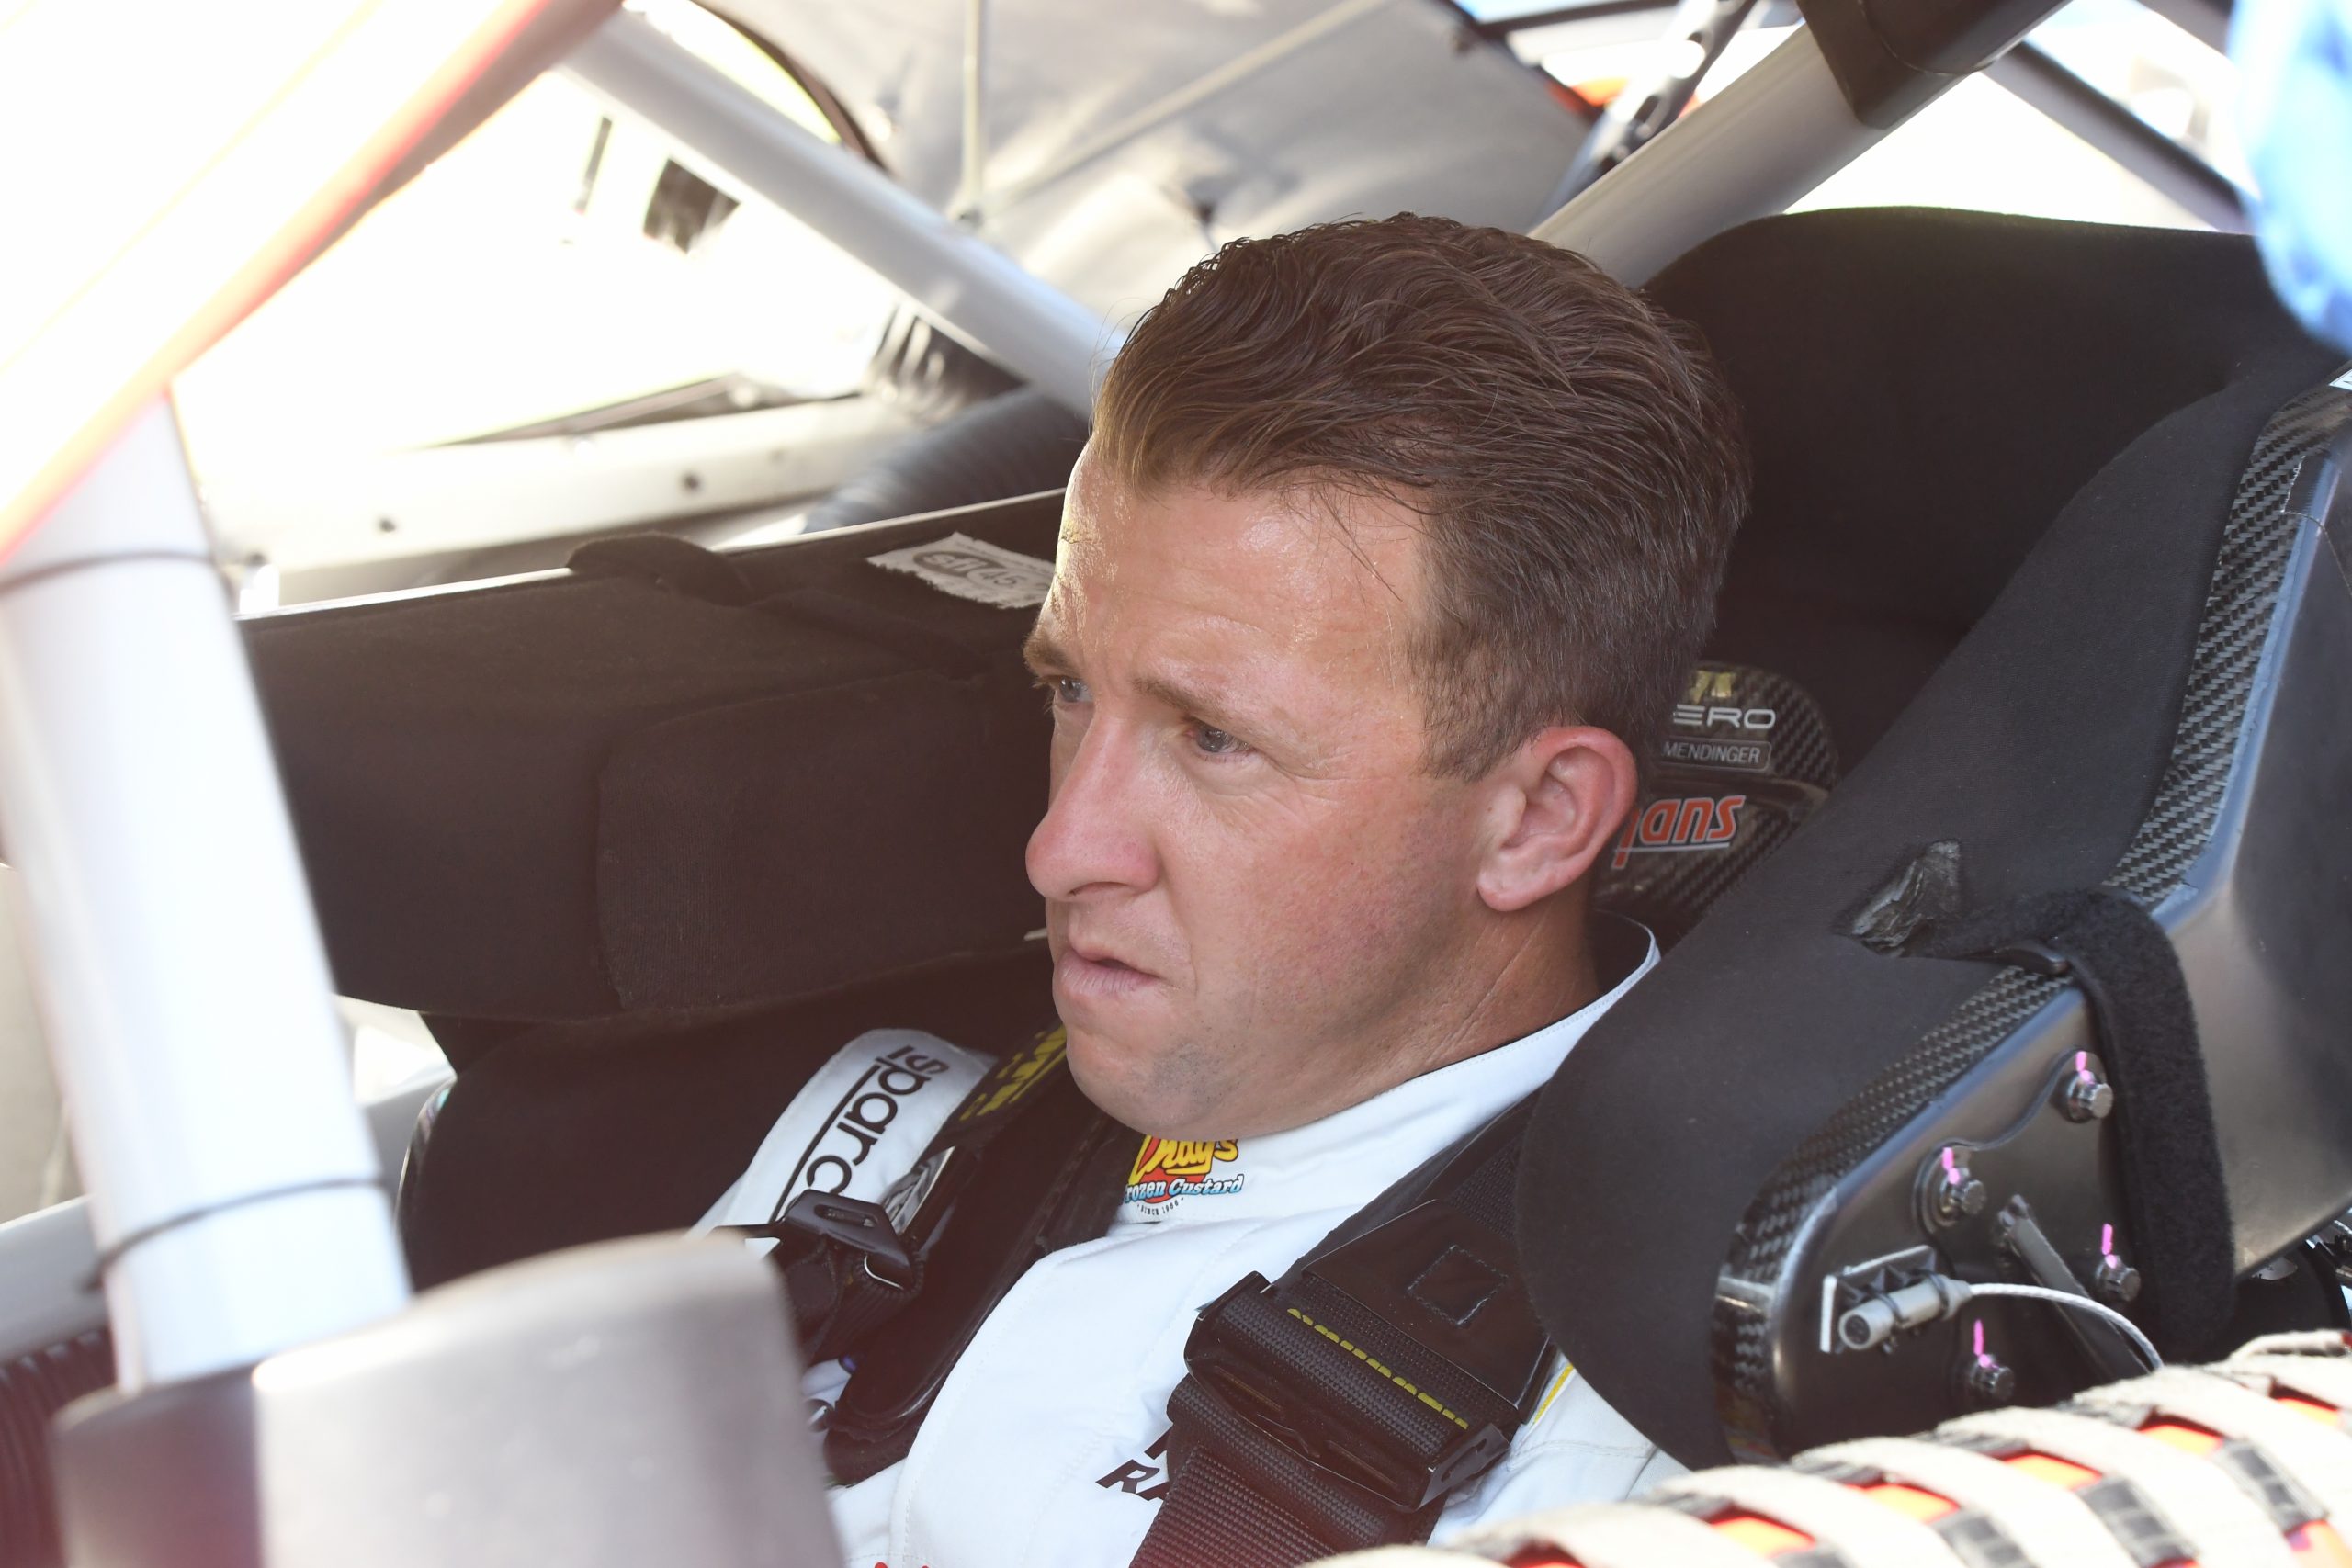 Allmendinger puts his game face on ahead of a stock car battle. (Photo: Sean Folsom | The Podium Finish)